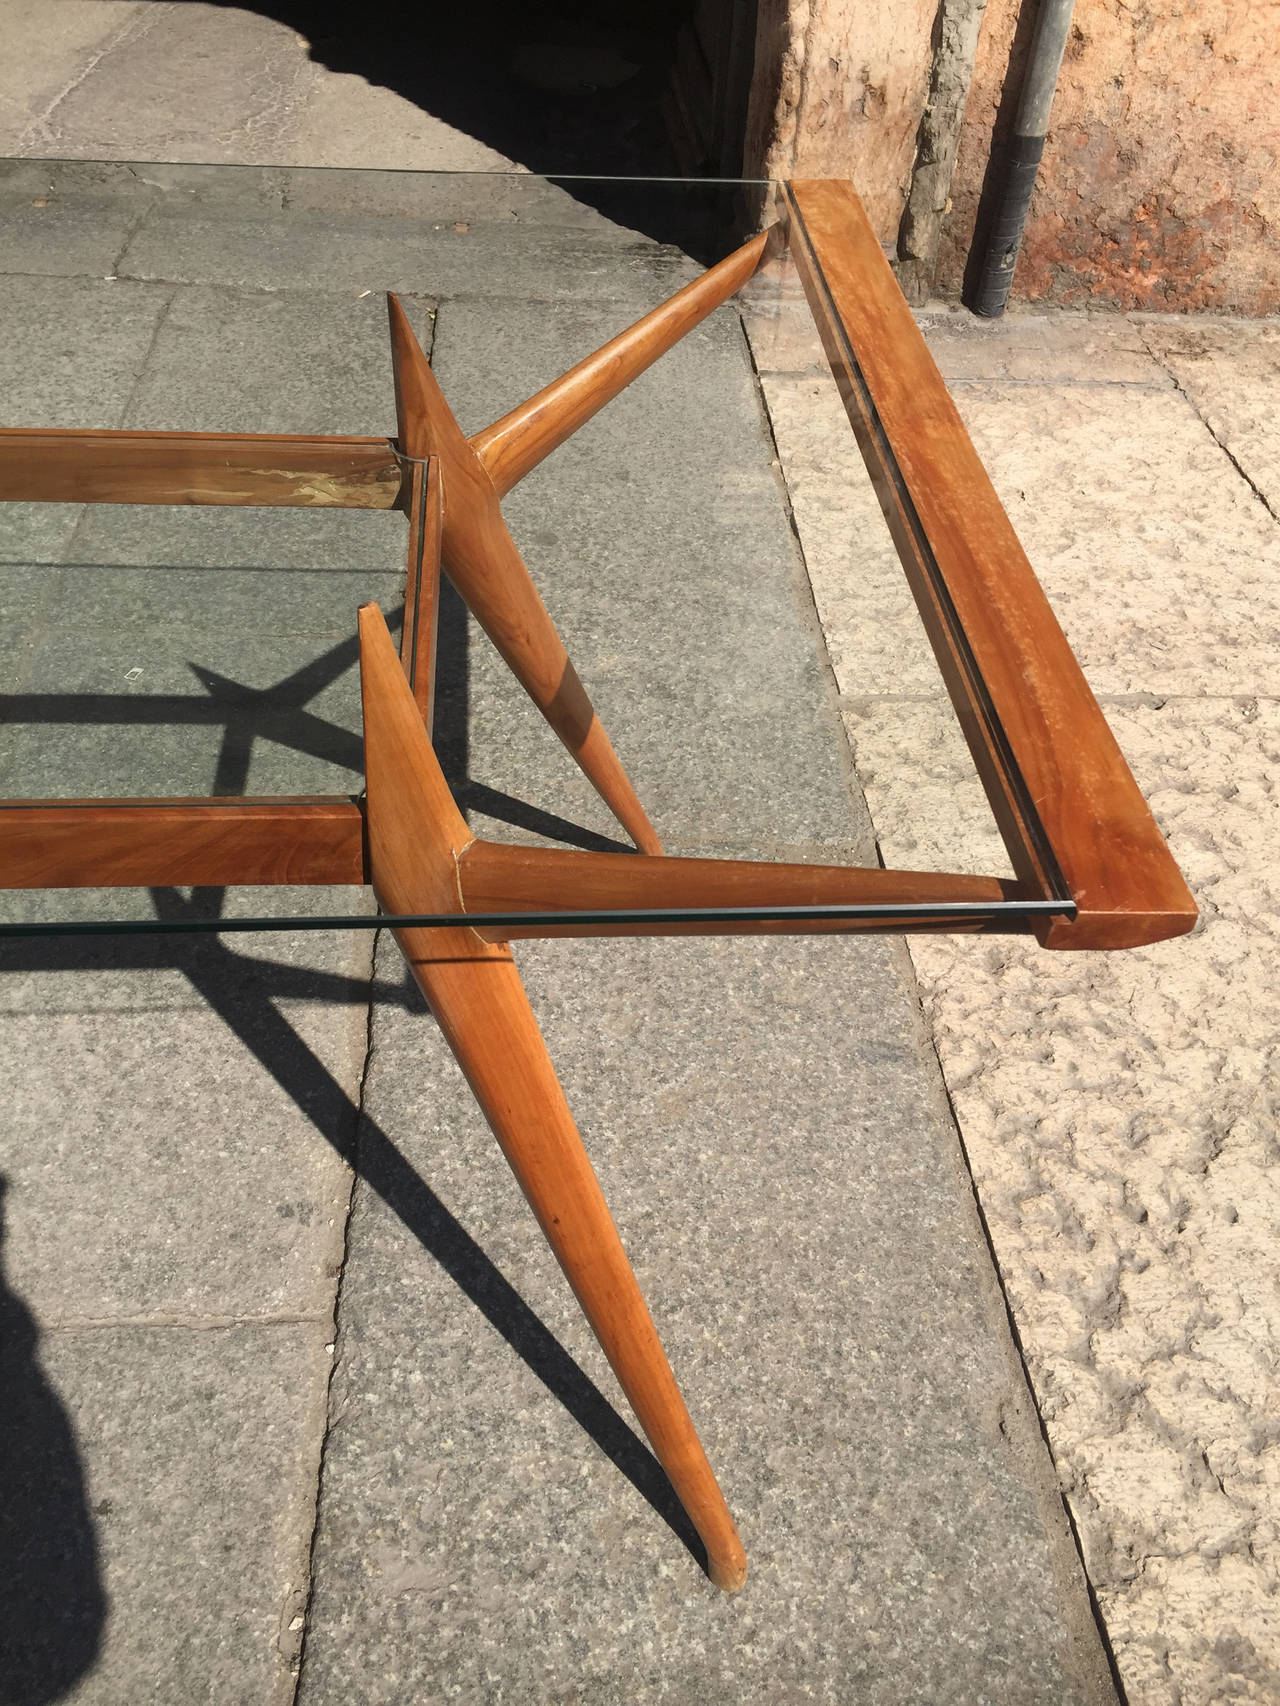 Fabulous desk table, design Carlo De Carli, 1950
Structure cherry wood, two floors in the original glass,
one of several models designed by de carli, geometric